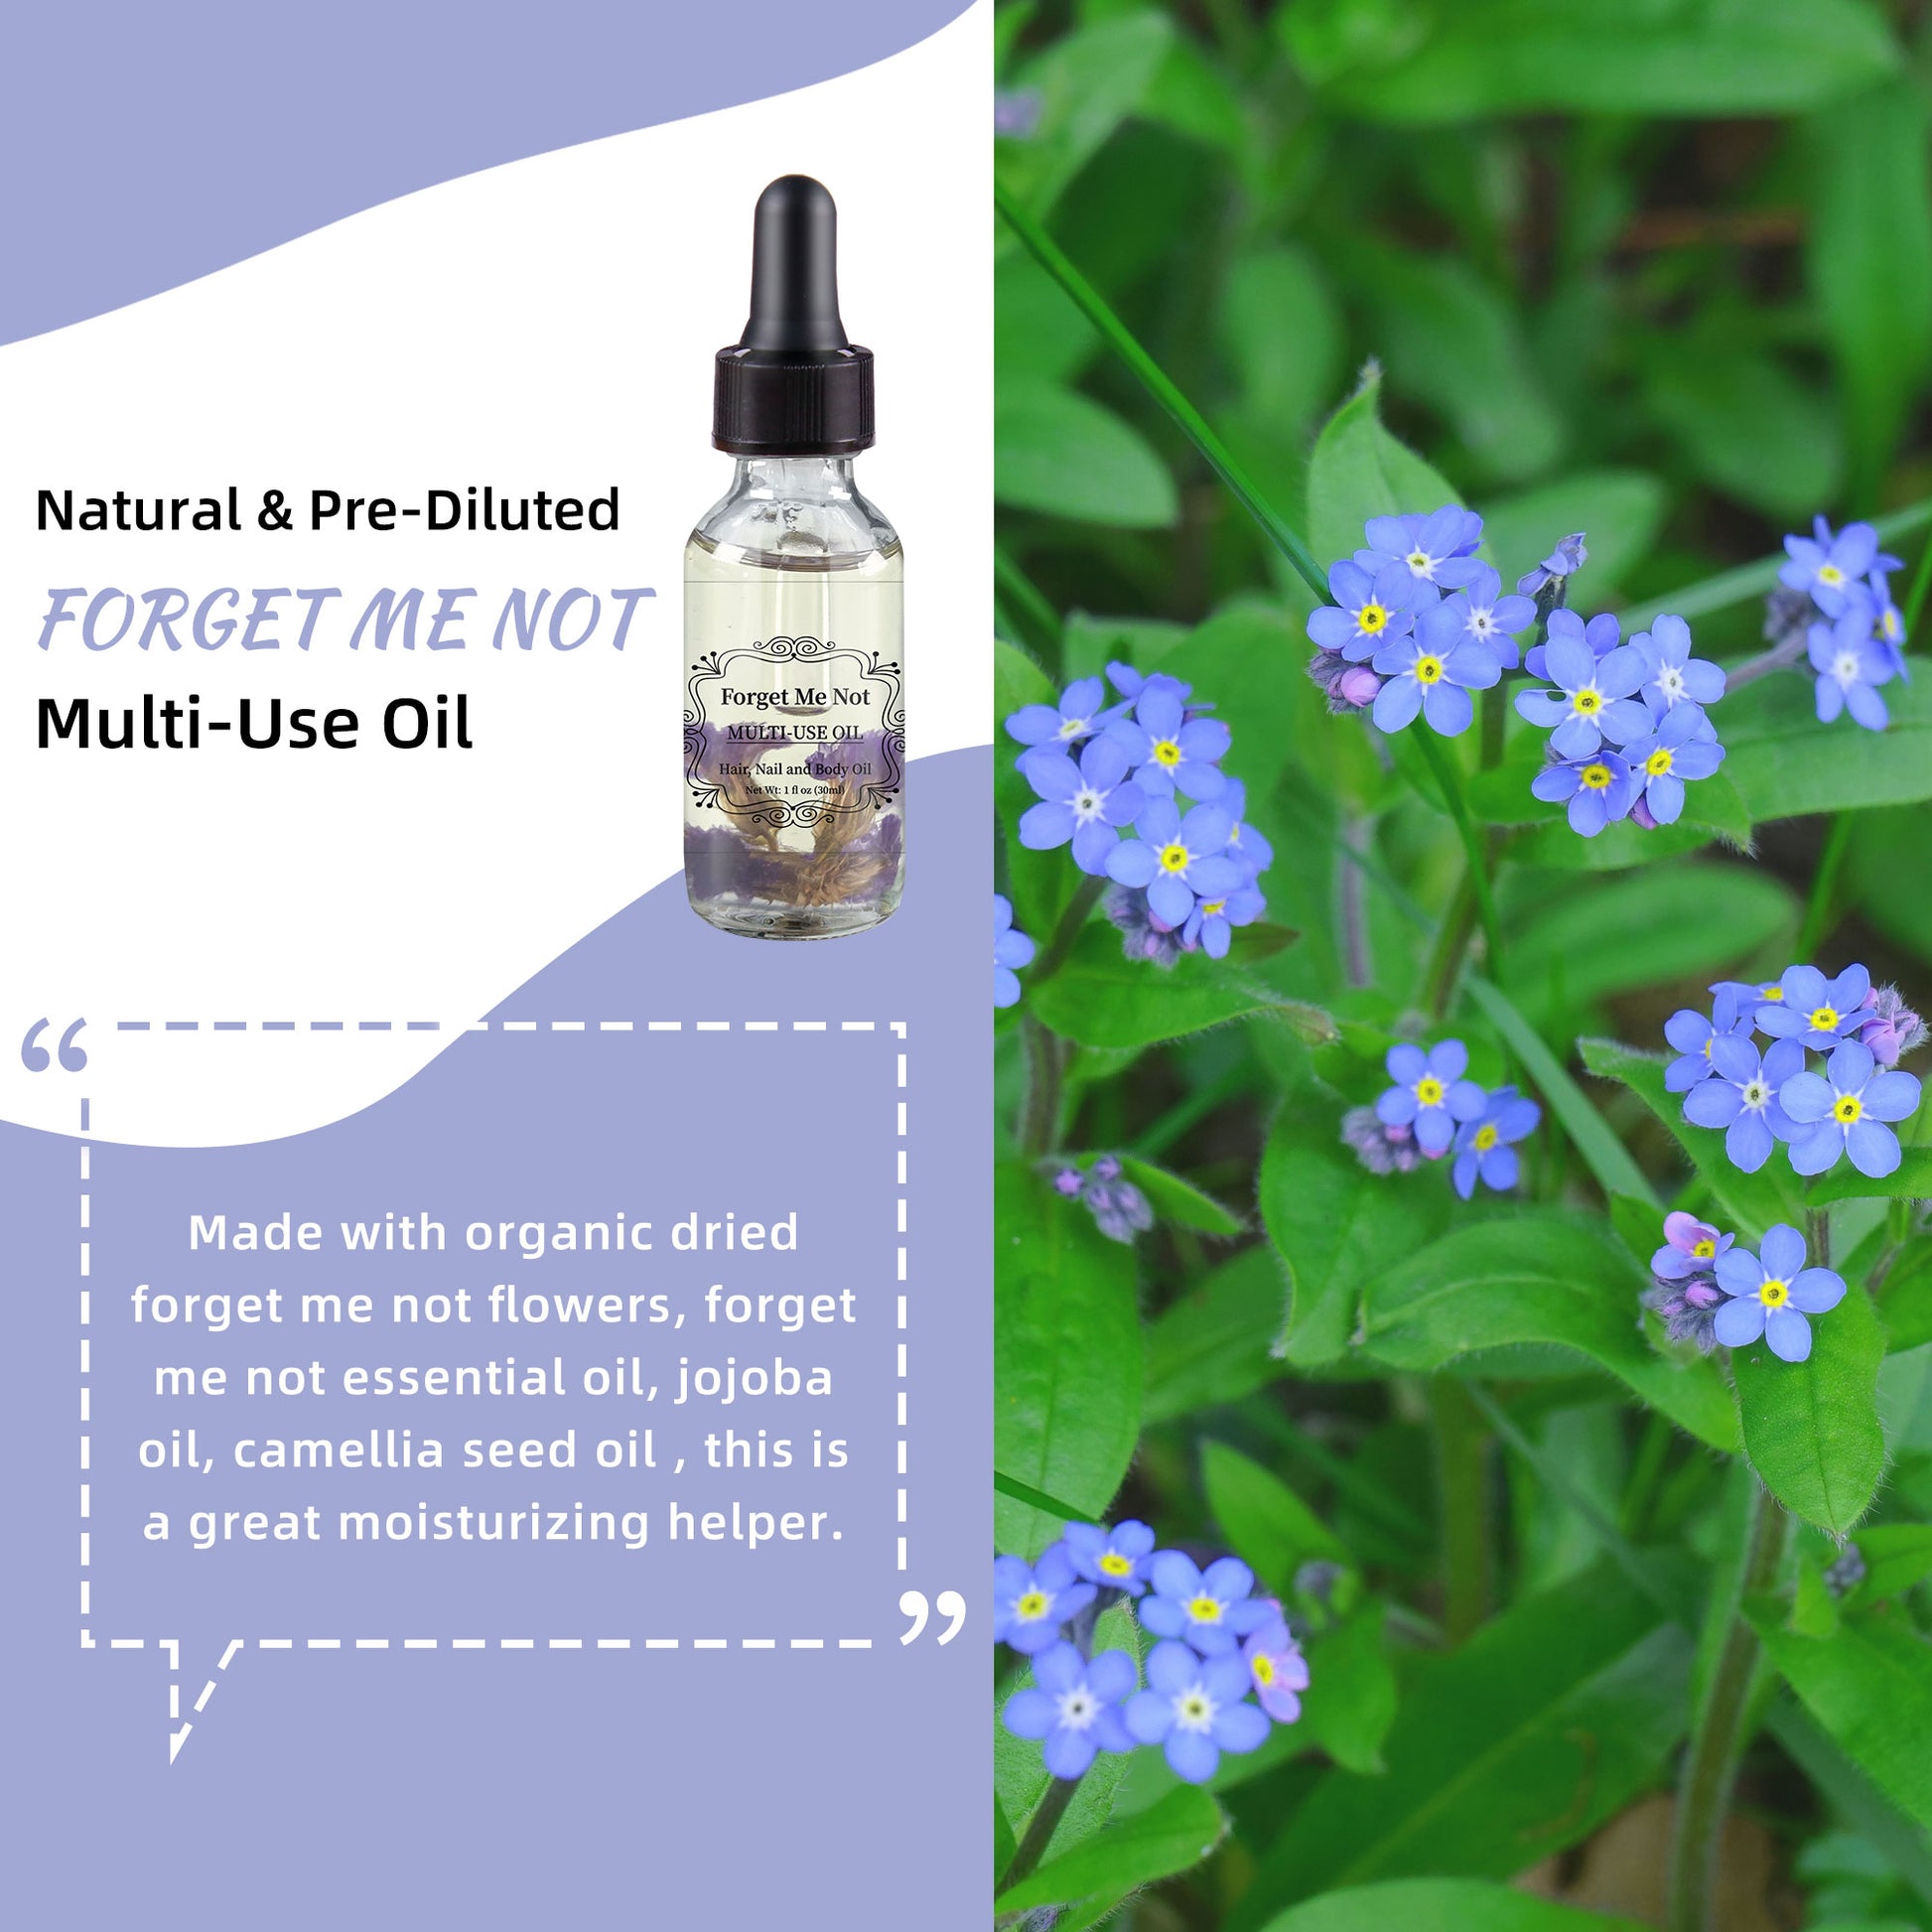 Forget Me Not Flower Multi-Use Body Oil